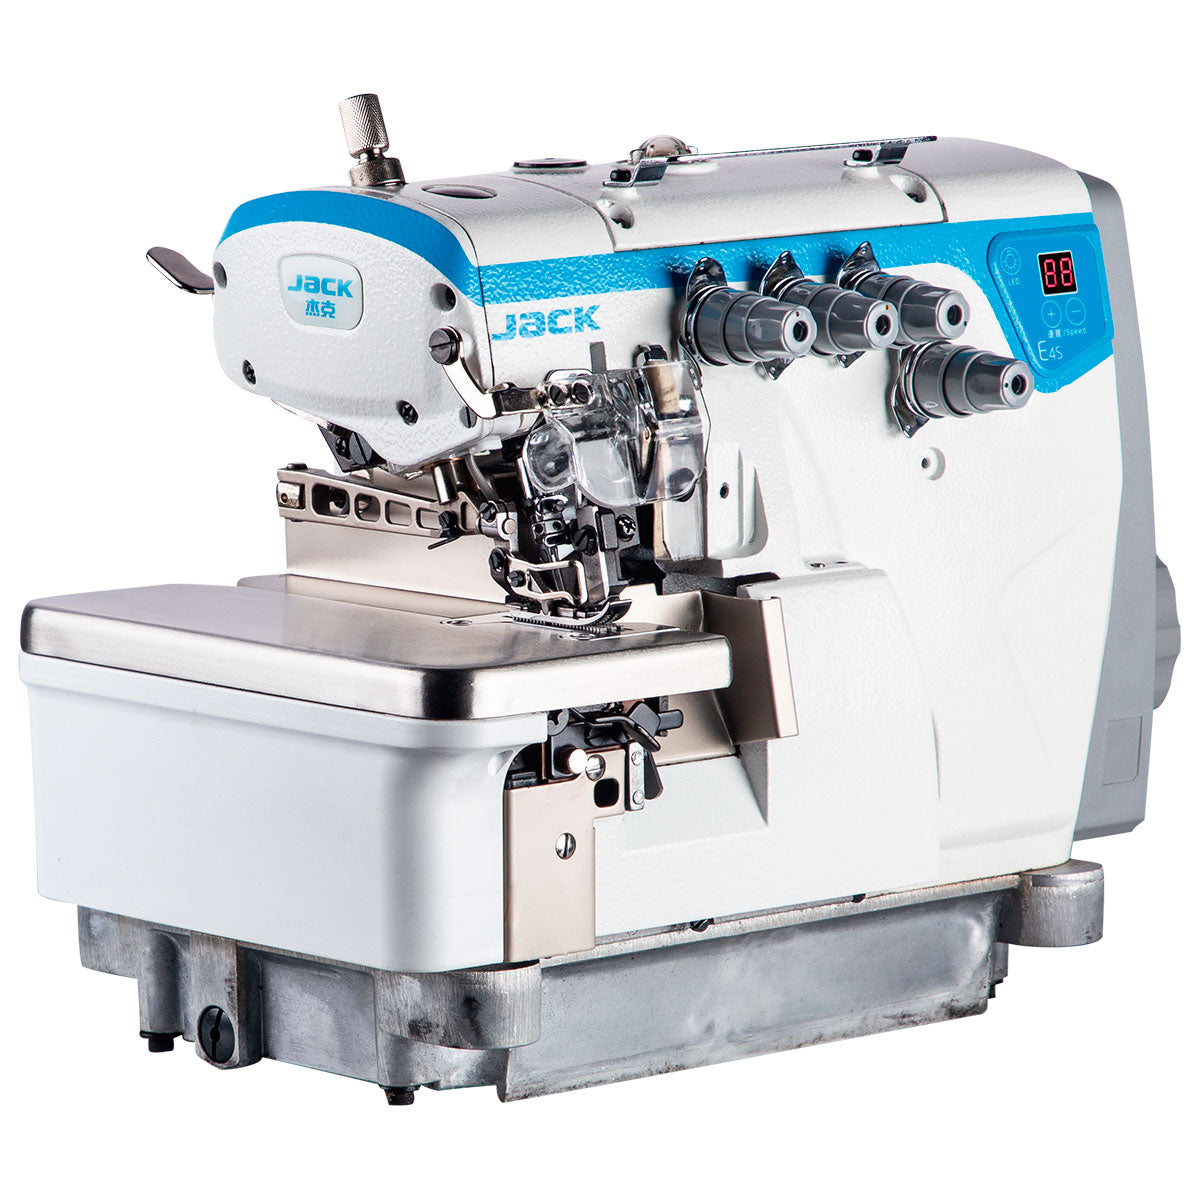 JACK E4S-3-32R2/223 3 Thread Overlock Industrial Sewing Machine Assembled with Fully Submerged Table Setup Included